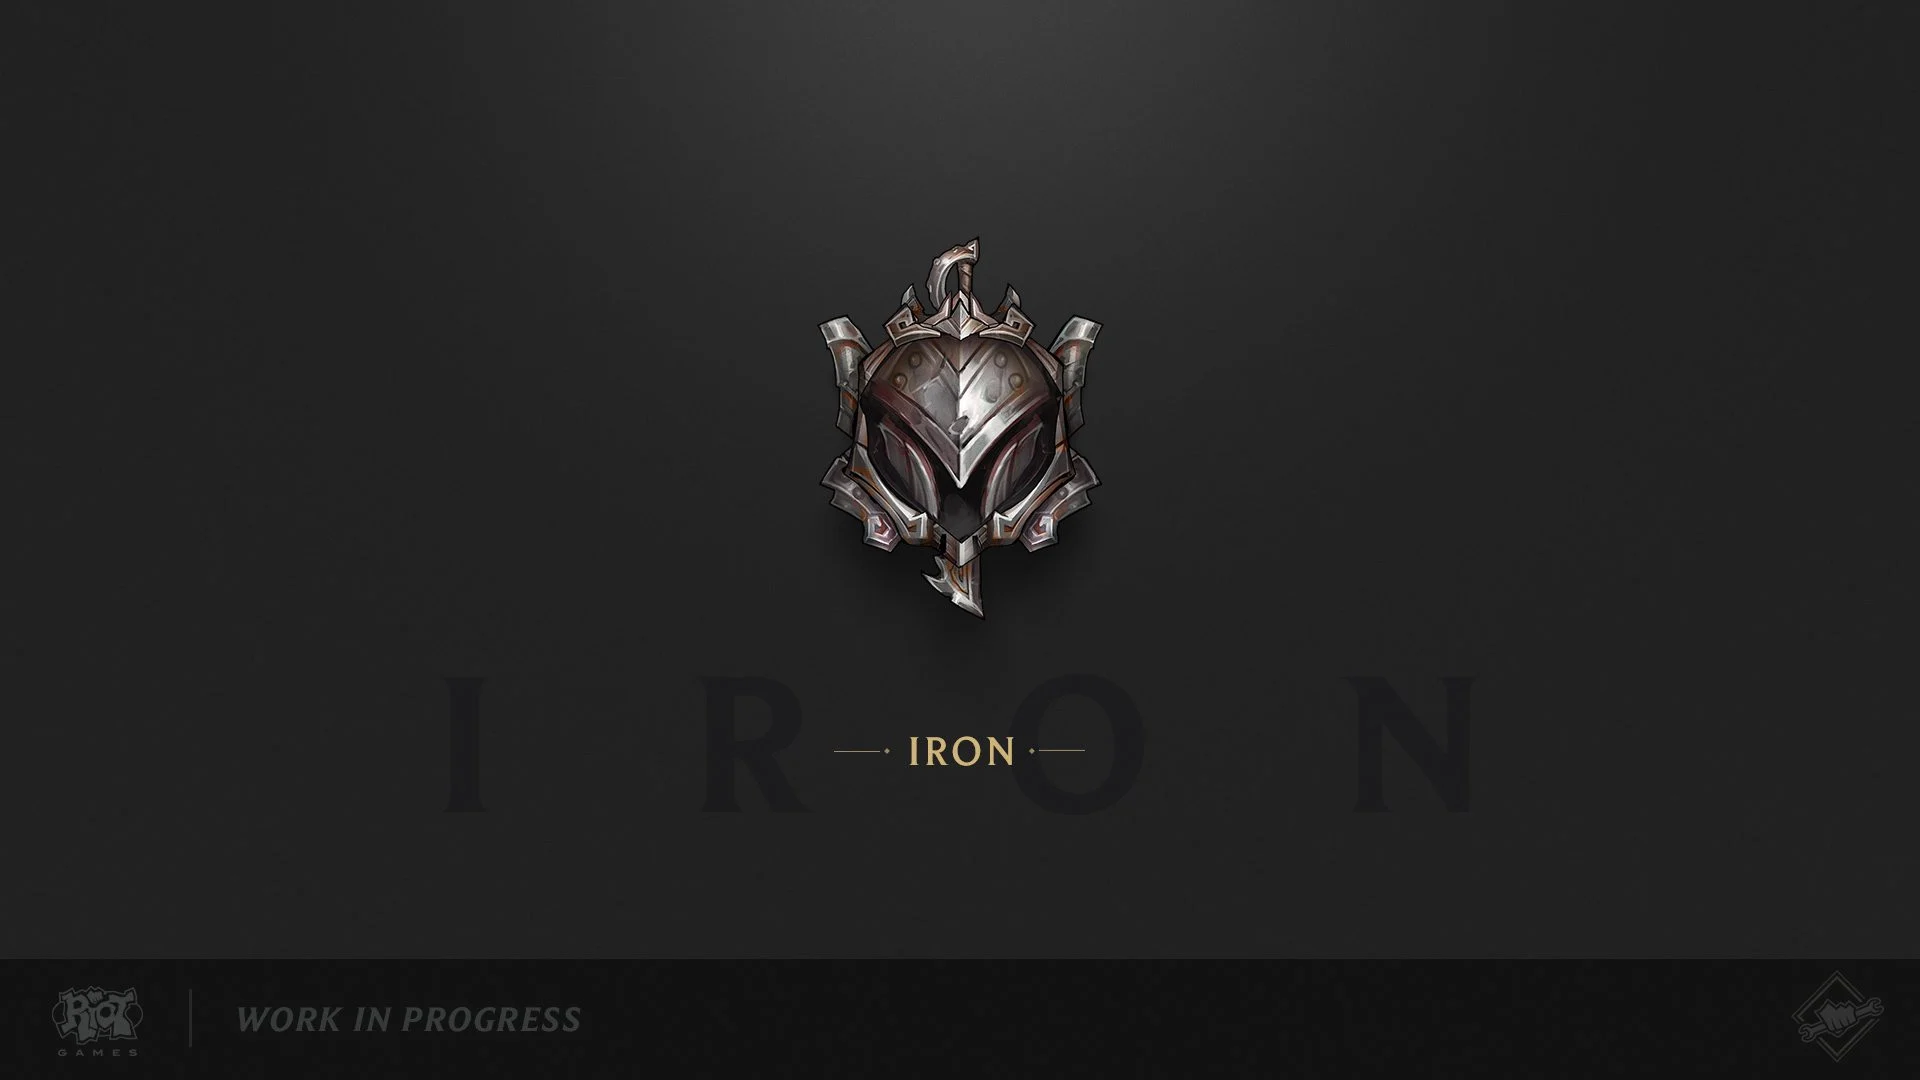 NA�Iron IV�Hand De-ranked�Full Access�Unverified�High Noon Ashe�36K BE